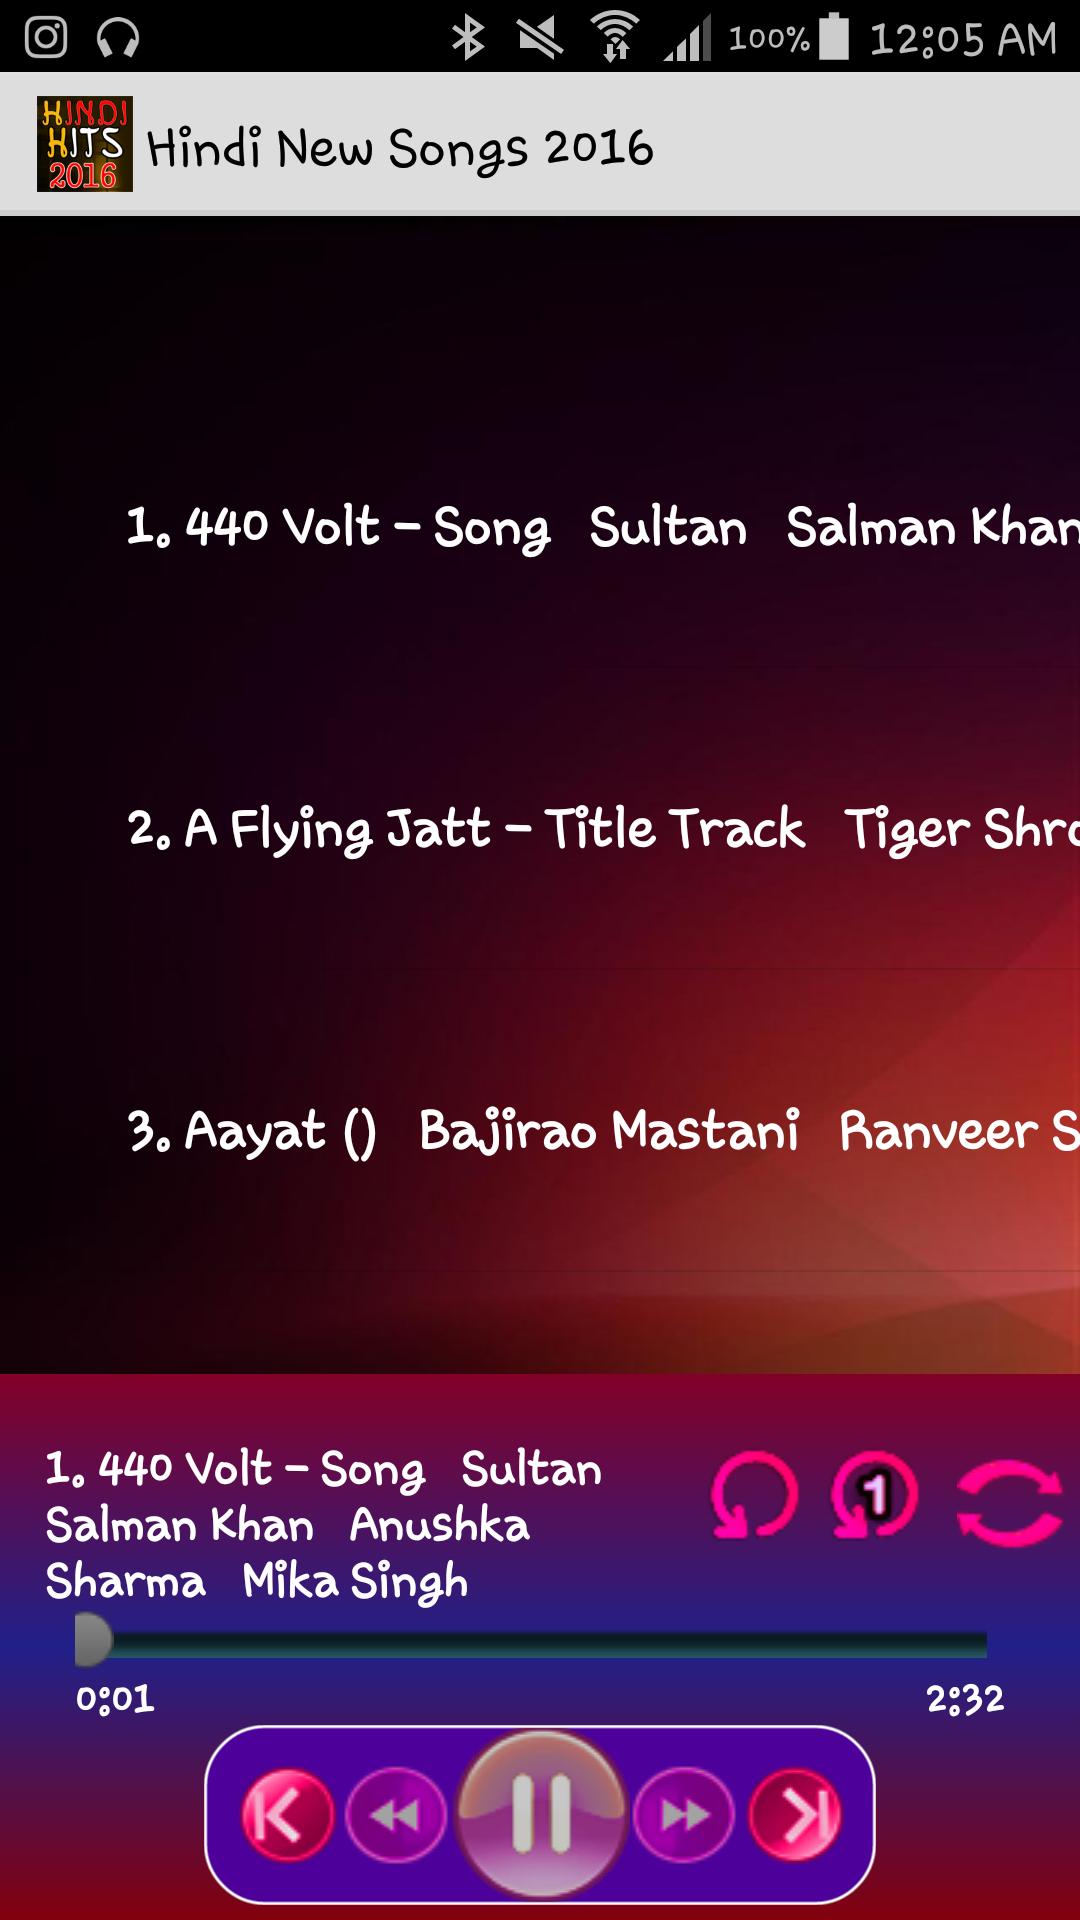 Hindi Top 100 Songs hits 2016 for Android - APK Download